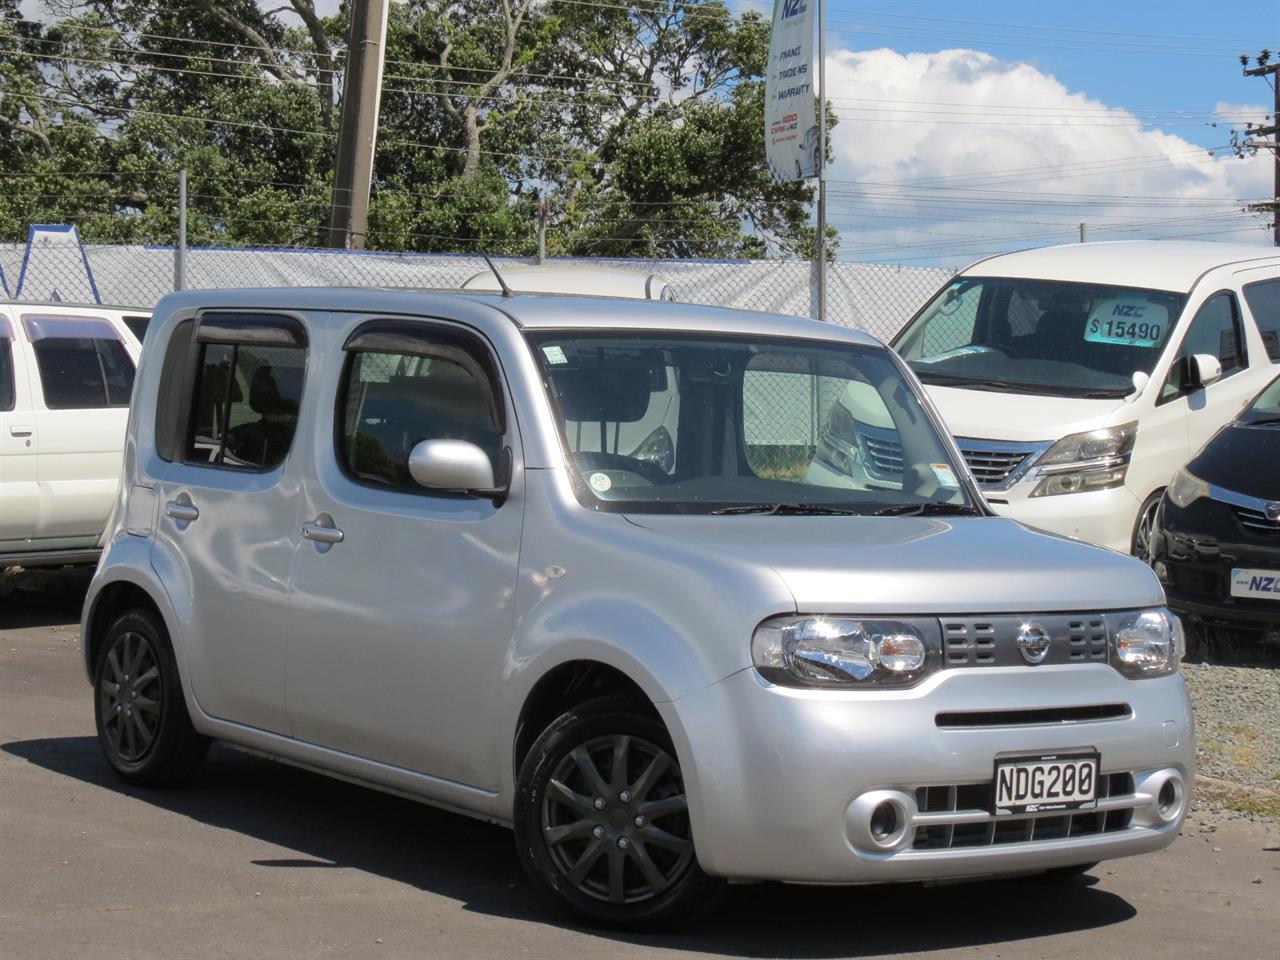 NZC best hot price for 2015 Nissan Cube in Auckland